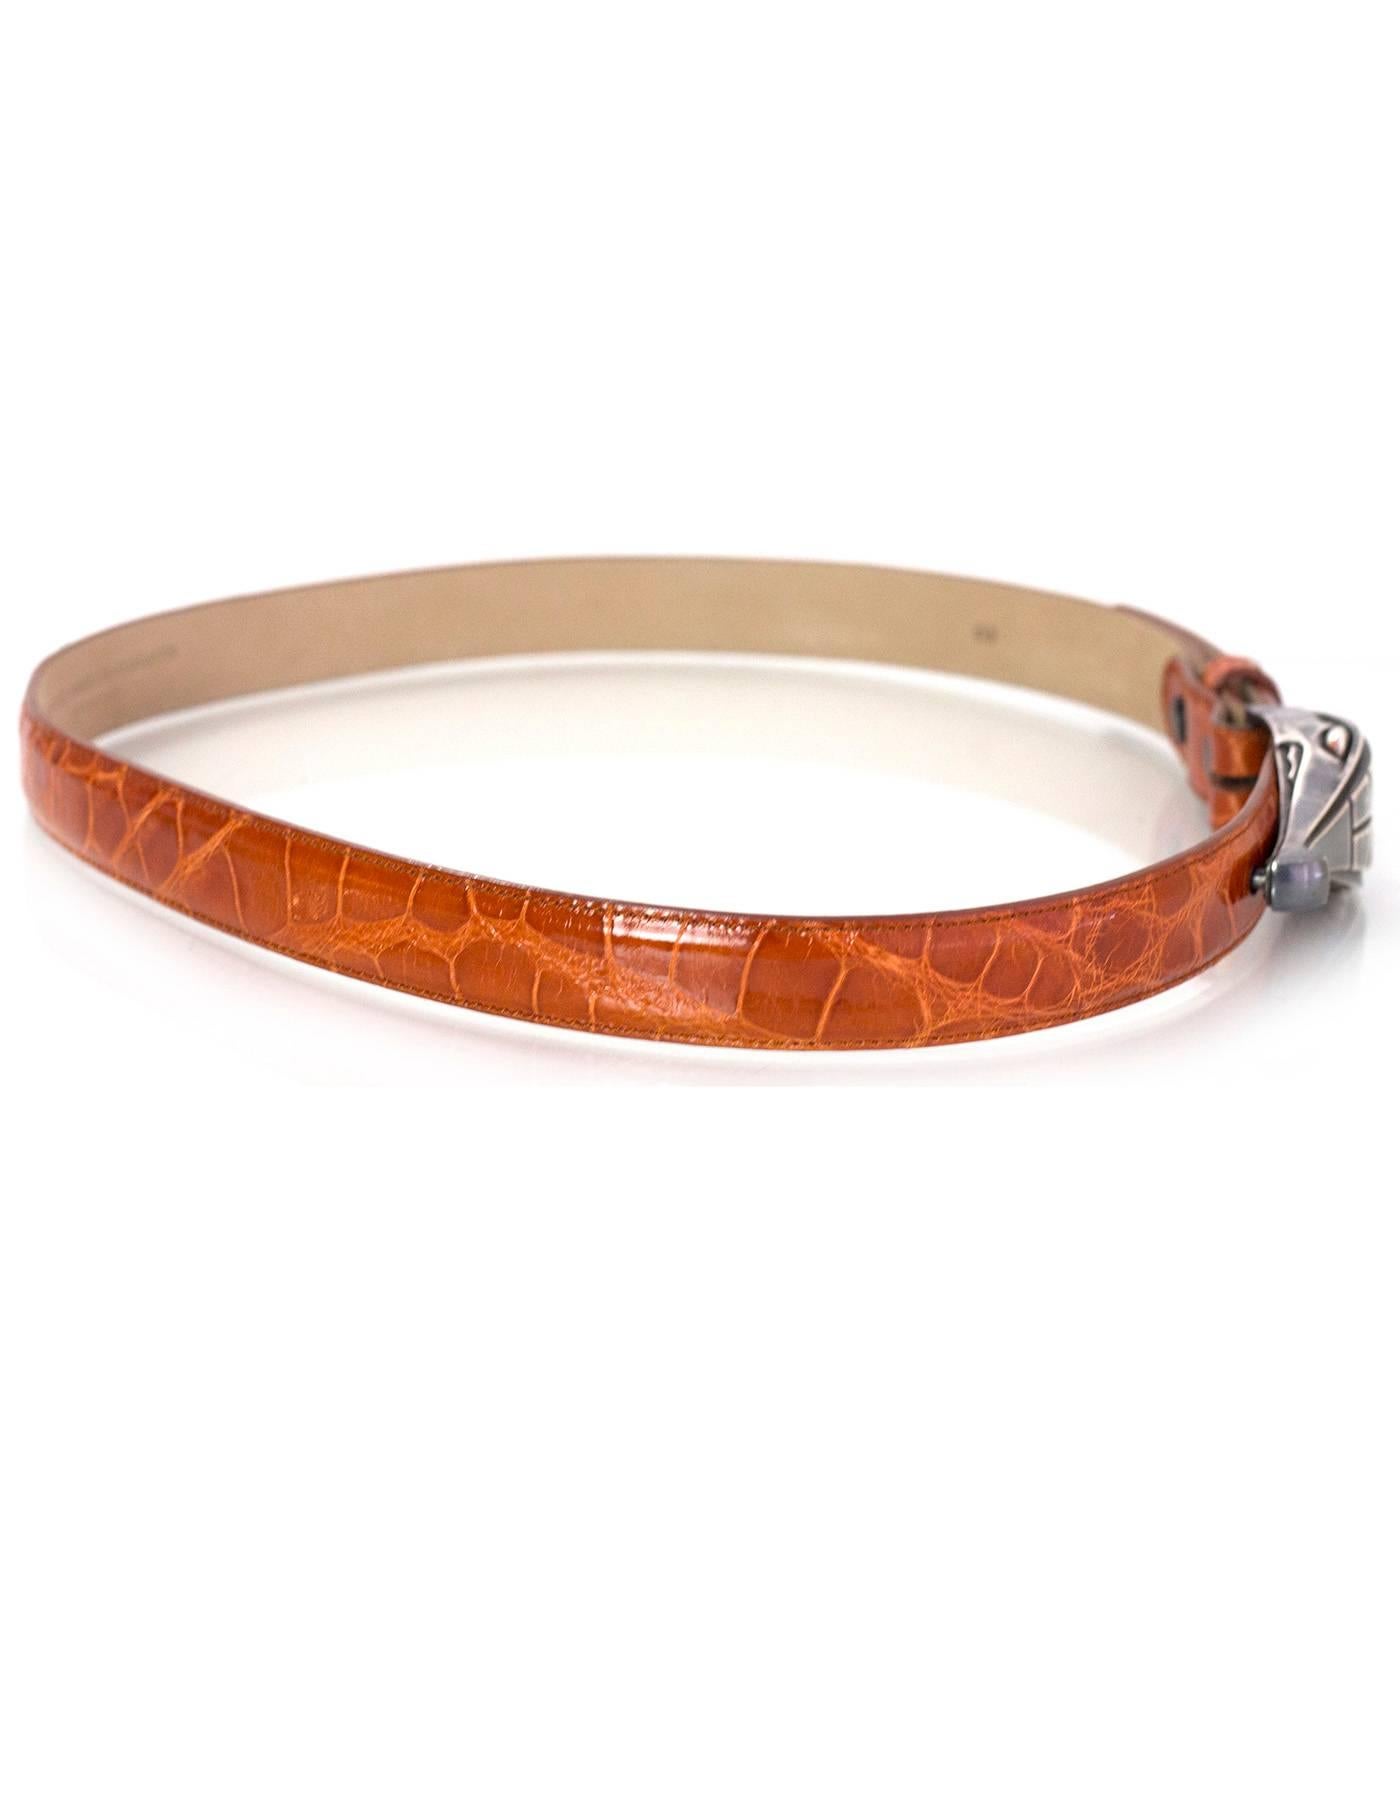 Barry Kieselstein-Cord Tan Alligator Belt 
Features sterling silver alligator head belt buckle

Made In: Italy
Year of Production: 2001
Color: Tan and silver
Materials: Alligator and sterling silver
Closure: Buckle and notch closure
Stamp: